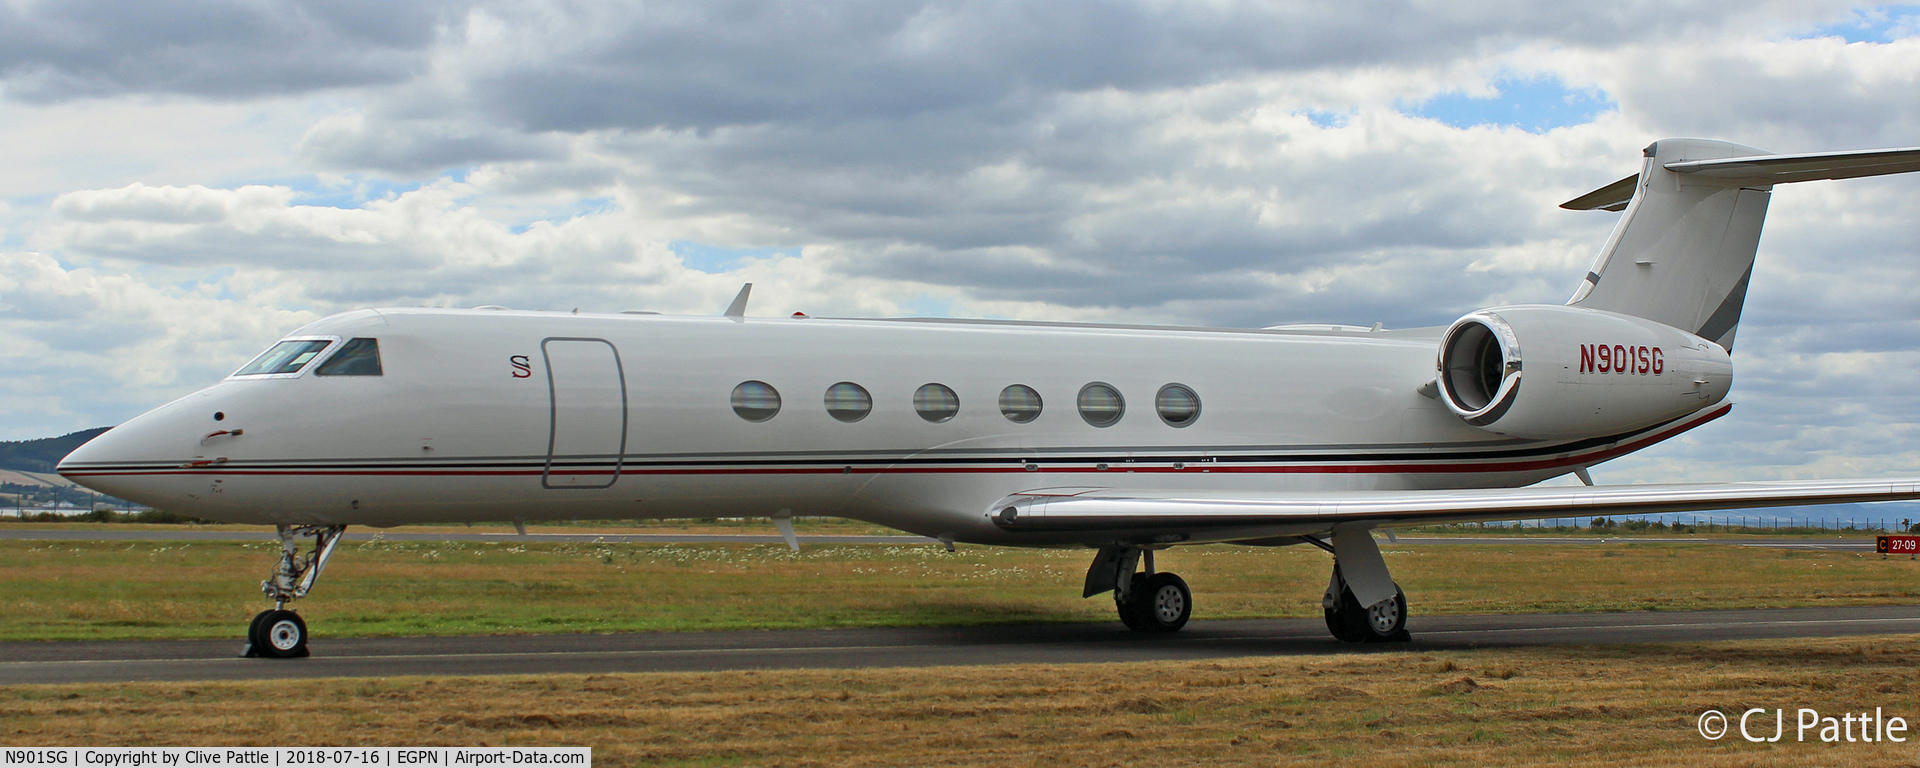 N901SG, 2009 Hawker Beechcraft 4000 C/N RC-29, Parked at Dundee for the 2018 British Open Golf Championships at nearby Carnoustie.